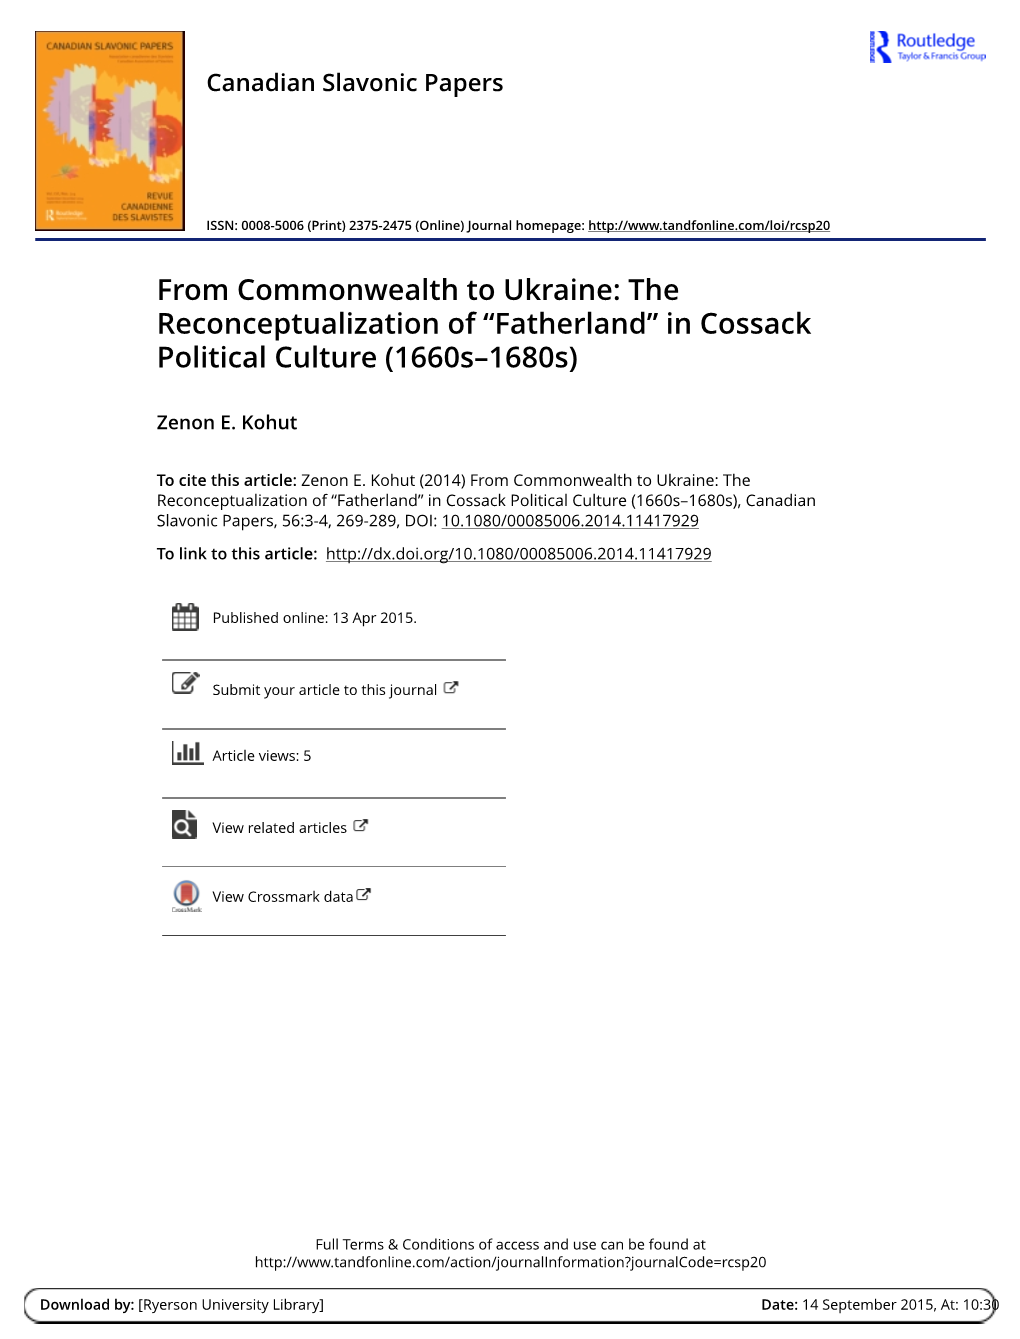 From Commonwealth to Ukraine: the Reconceptualization of “Fatherland” in Cossack Political Culture (1660S–1680S)